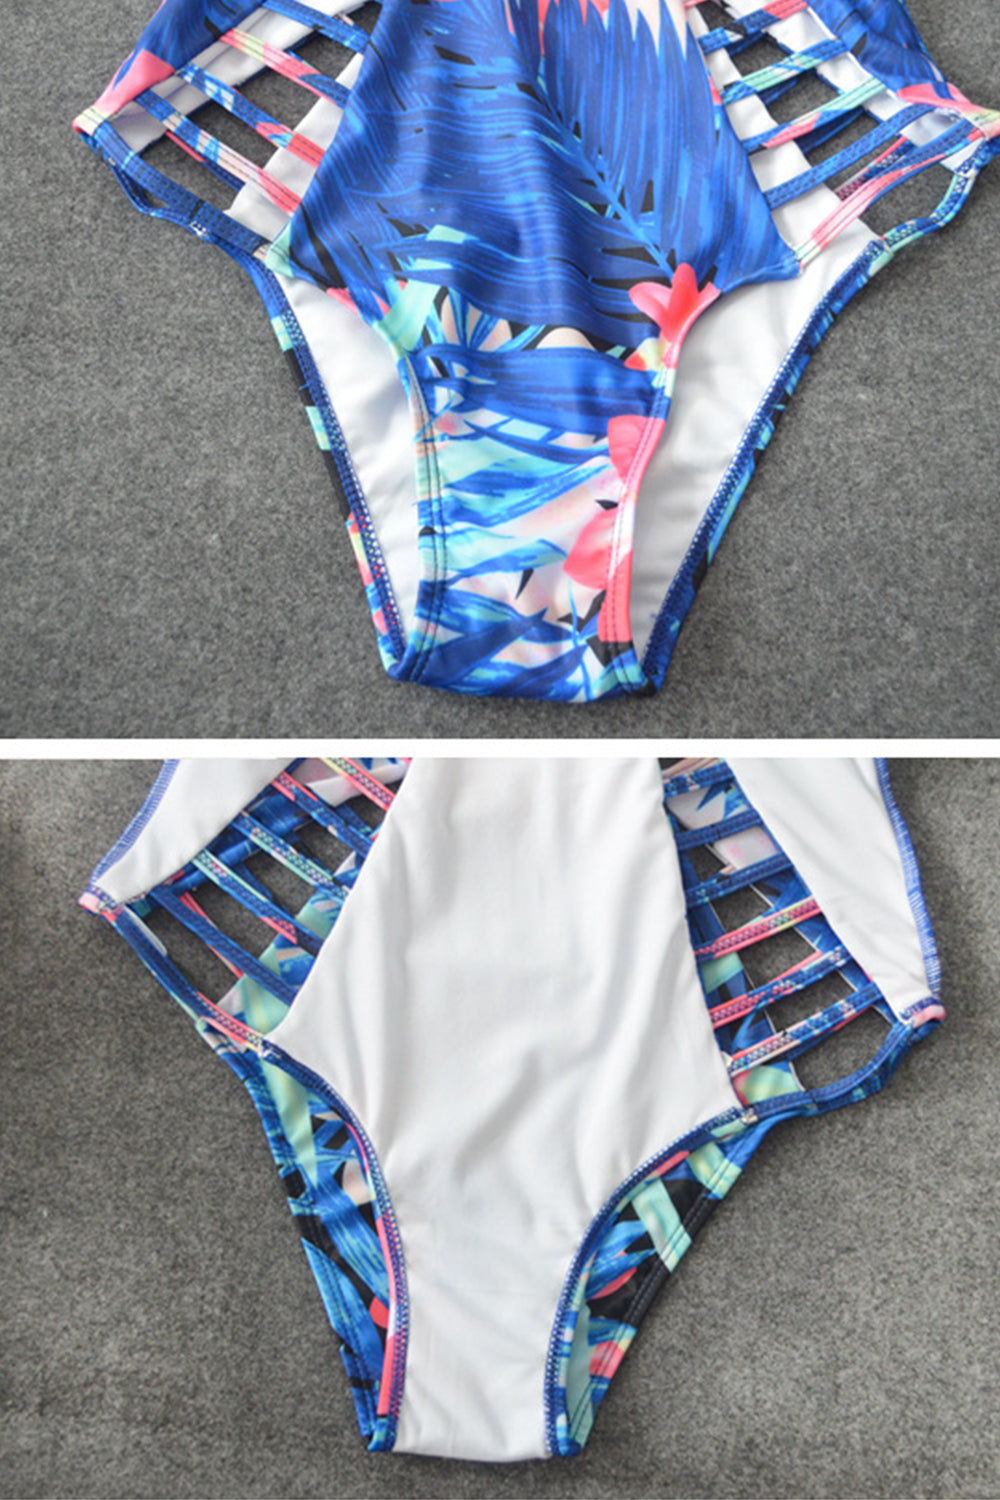 Iyasson Blue Floral Printing Halter One-piece swimsuit